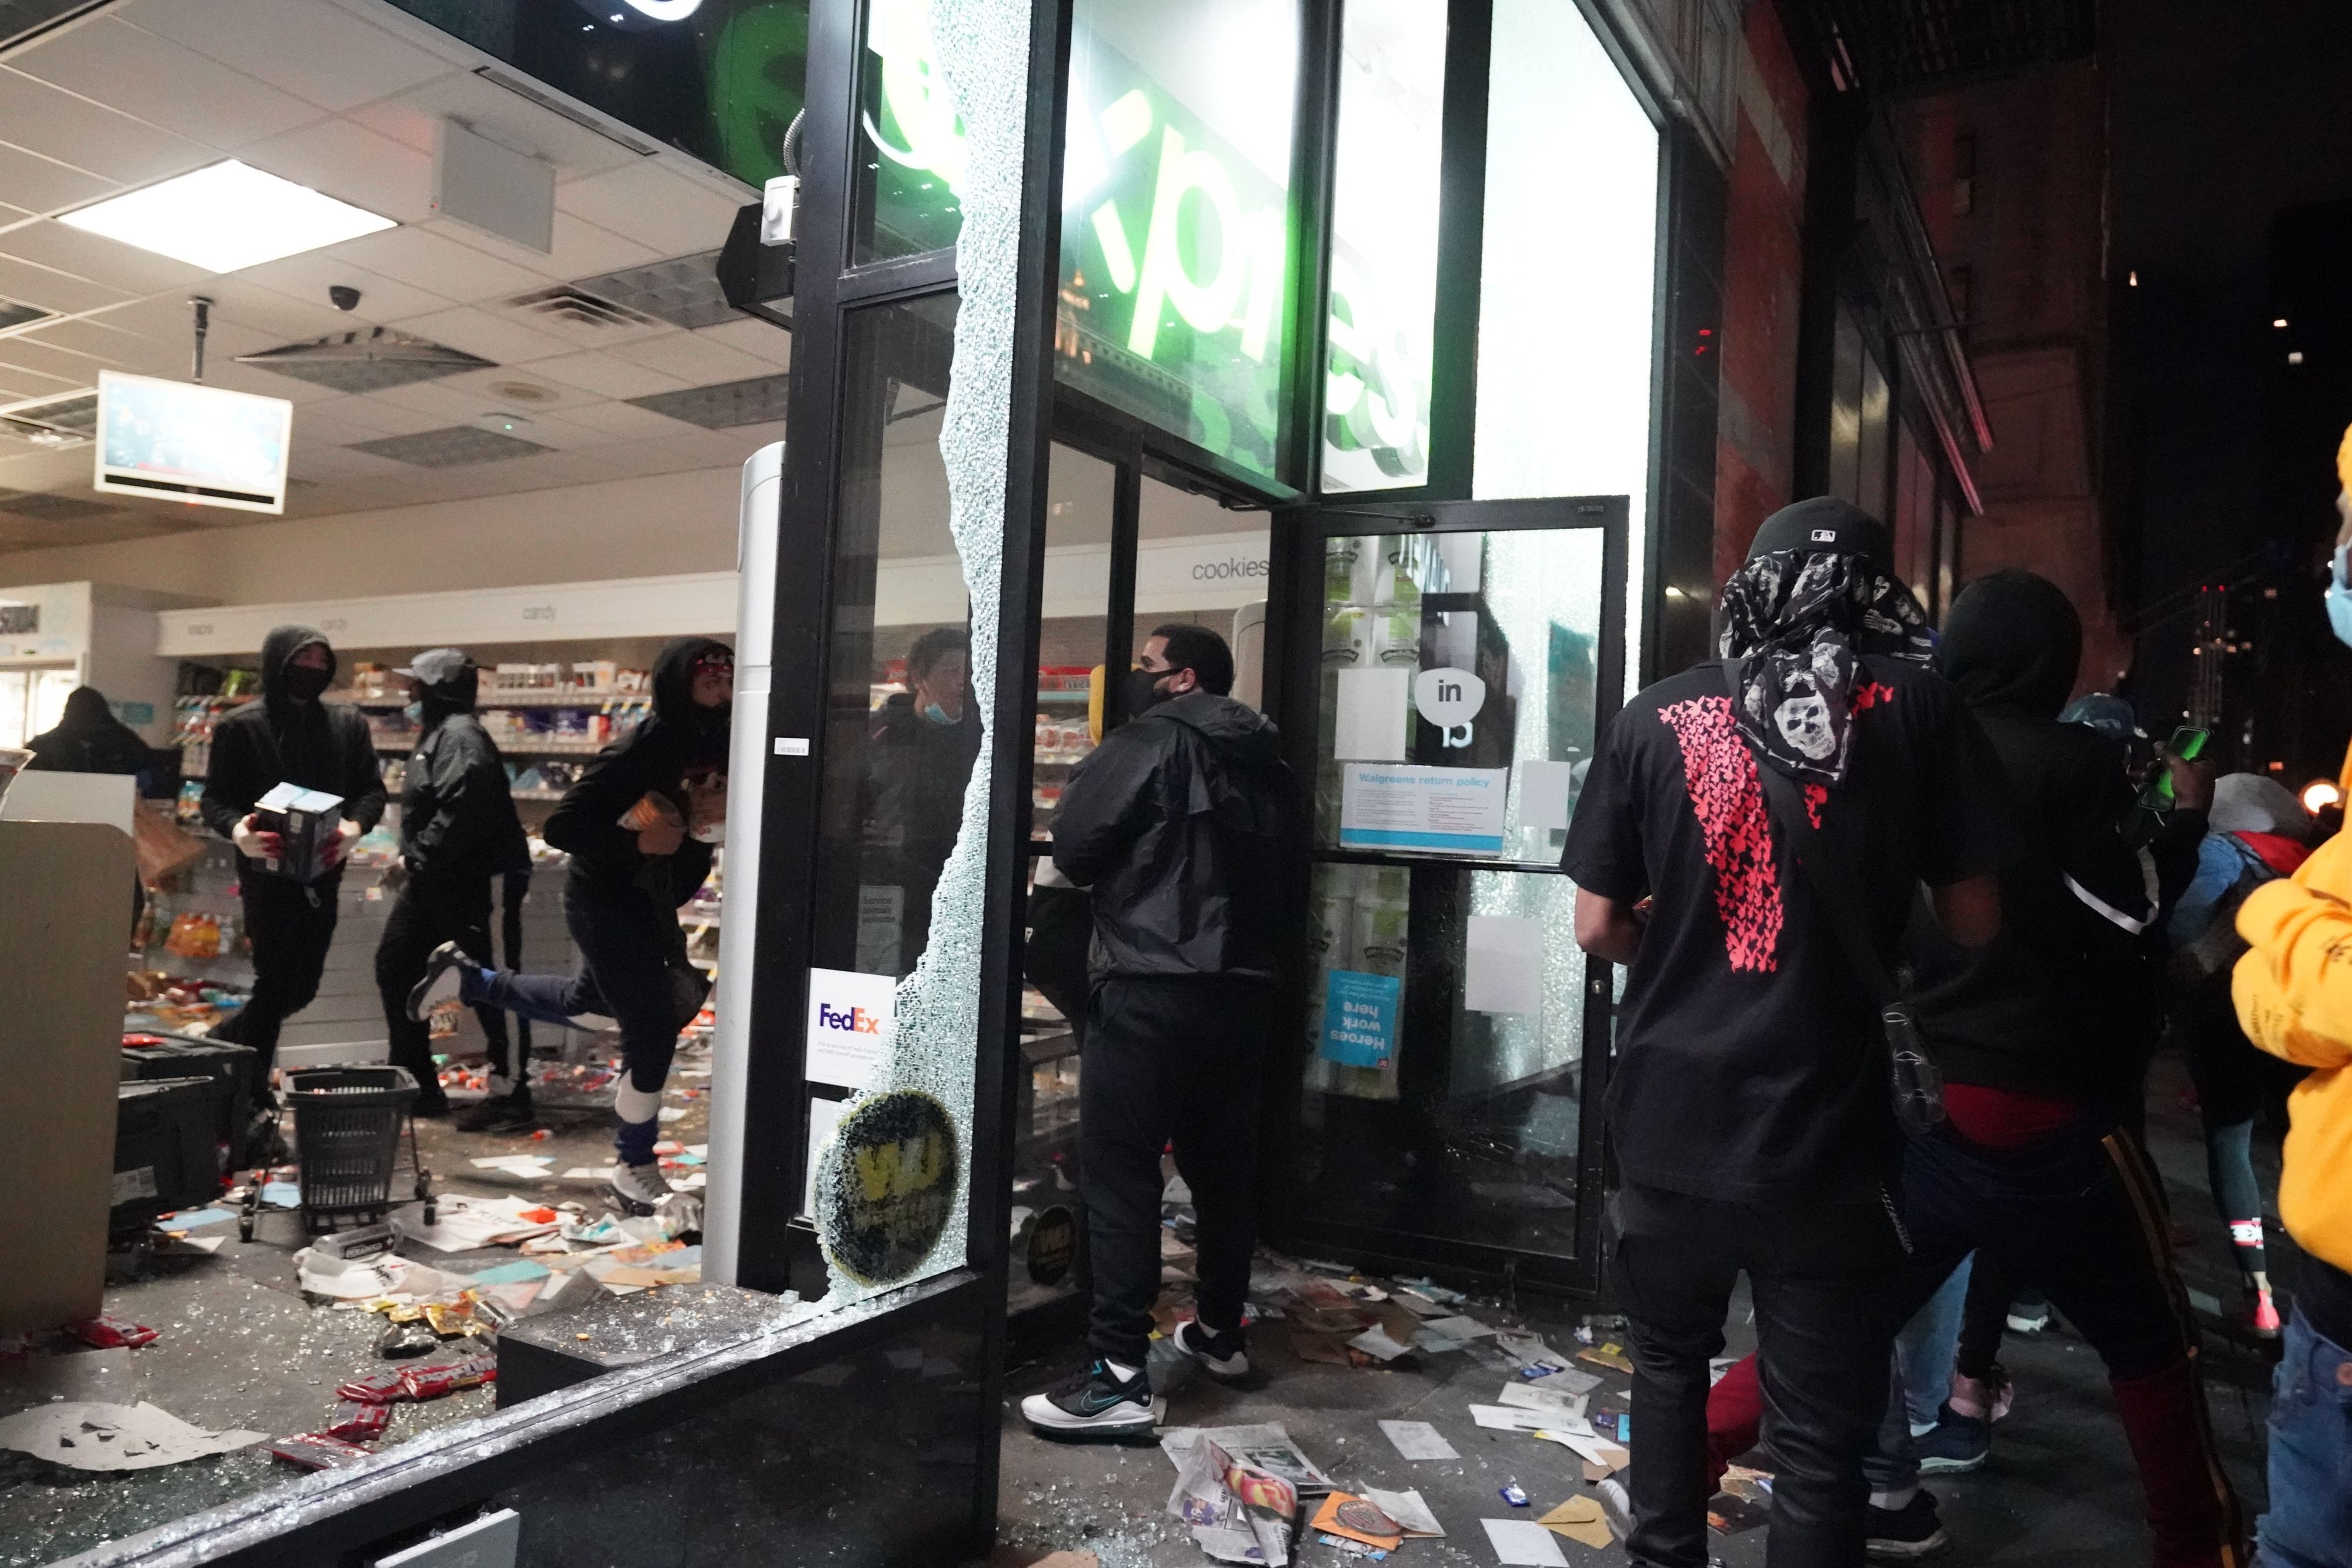 TOPSHOT - People loot a store during demonstrations over the death of George Floyd by a Minneapolis police officer on June 1, 2020 in New York. - New York's mayor Bill de Blasio today declared a city curfew from 11:00 pm to 5:00 am, as sometimes violent anti-racism protests roil communities nationwide. Saying that "we support peaceful protest," De Blasio tweeted he had made the decision in consultation with the state's governor Andrew Cuomo, following the lead of many large US cities that instituted curfews in a bid to clamp down on violence and looting. (Photo by Bryan R. Smith / AFP) (Photo by BRYAN R. SMITH/AFP via Getty Images)